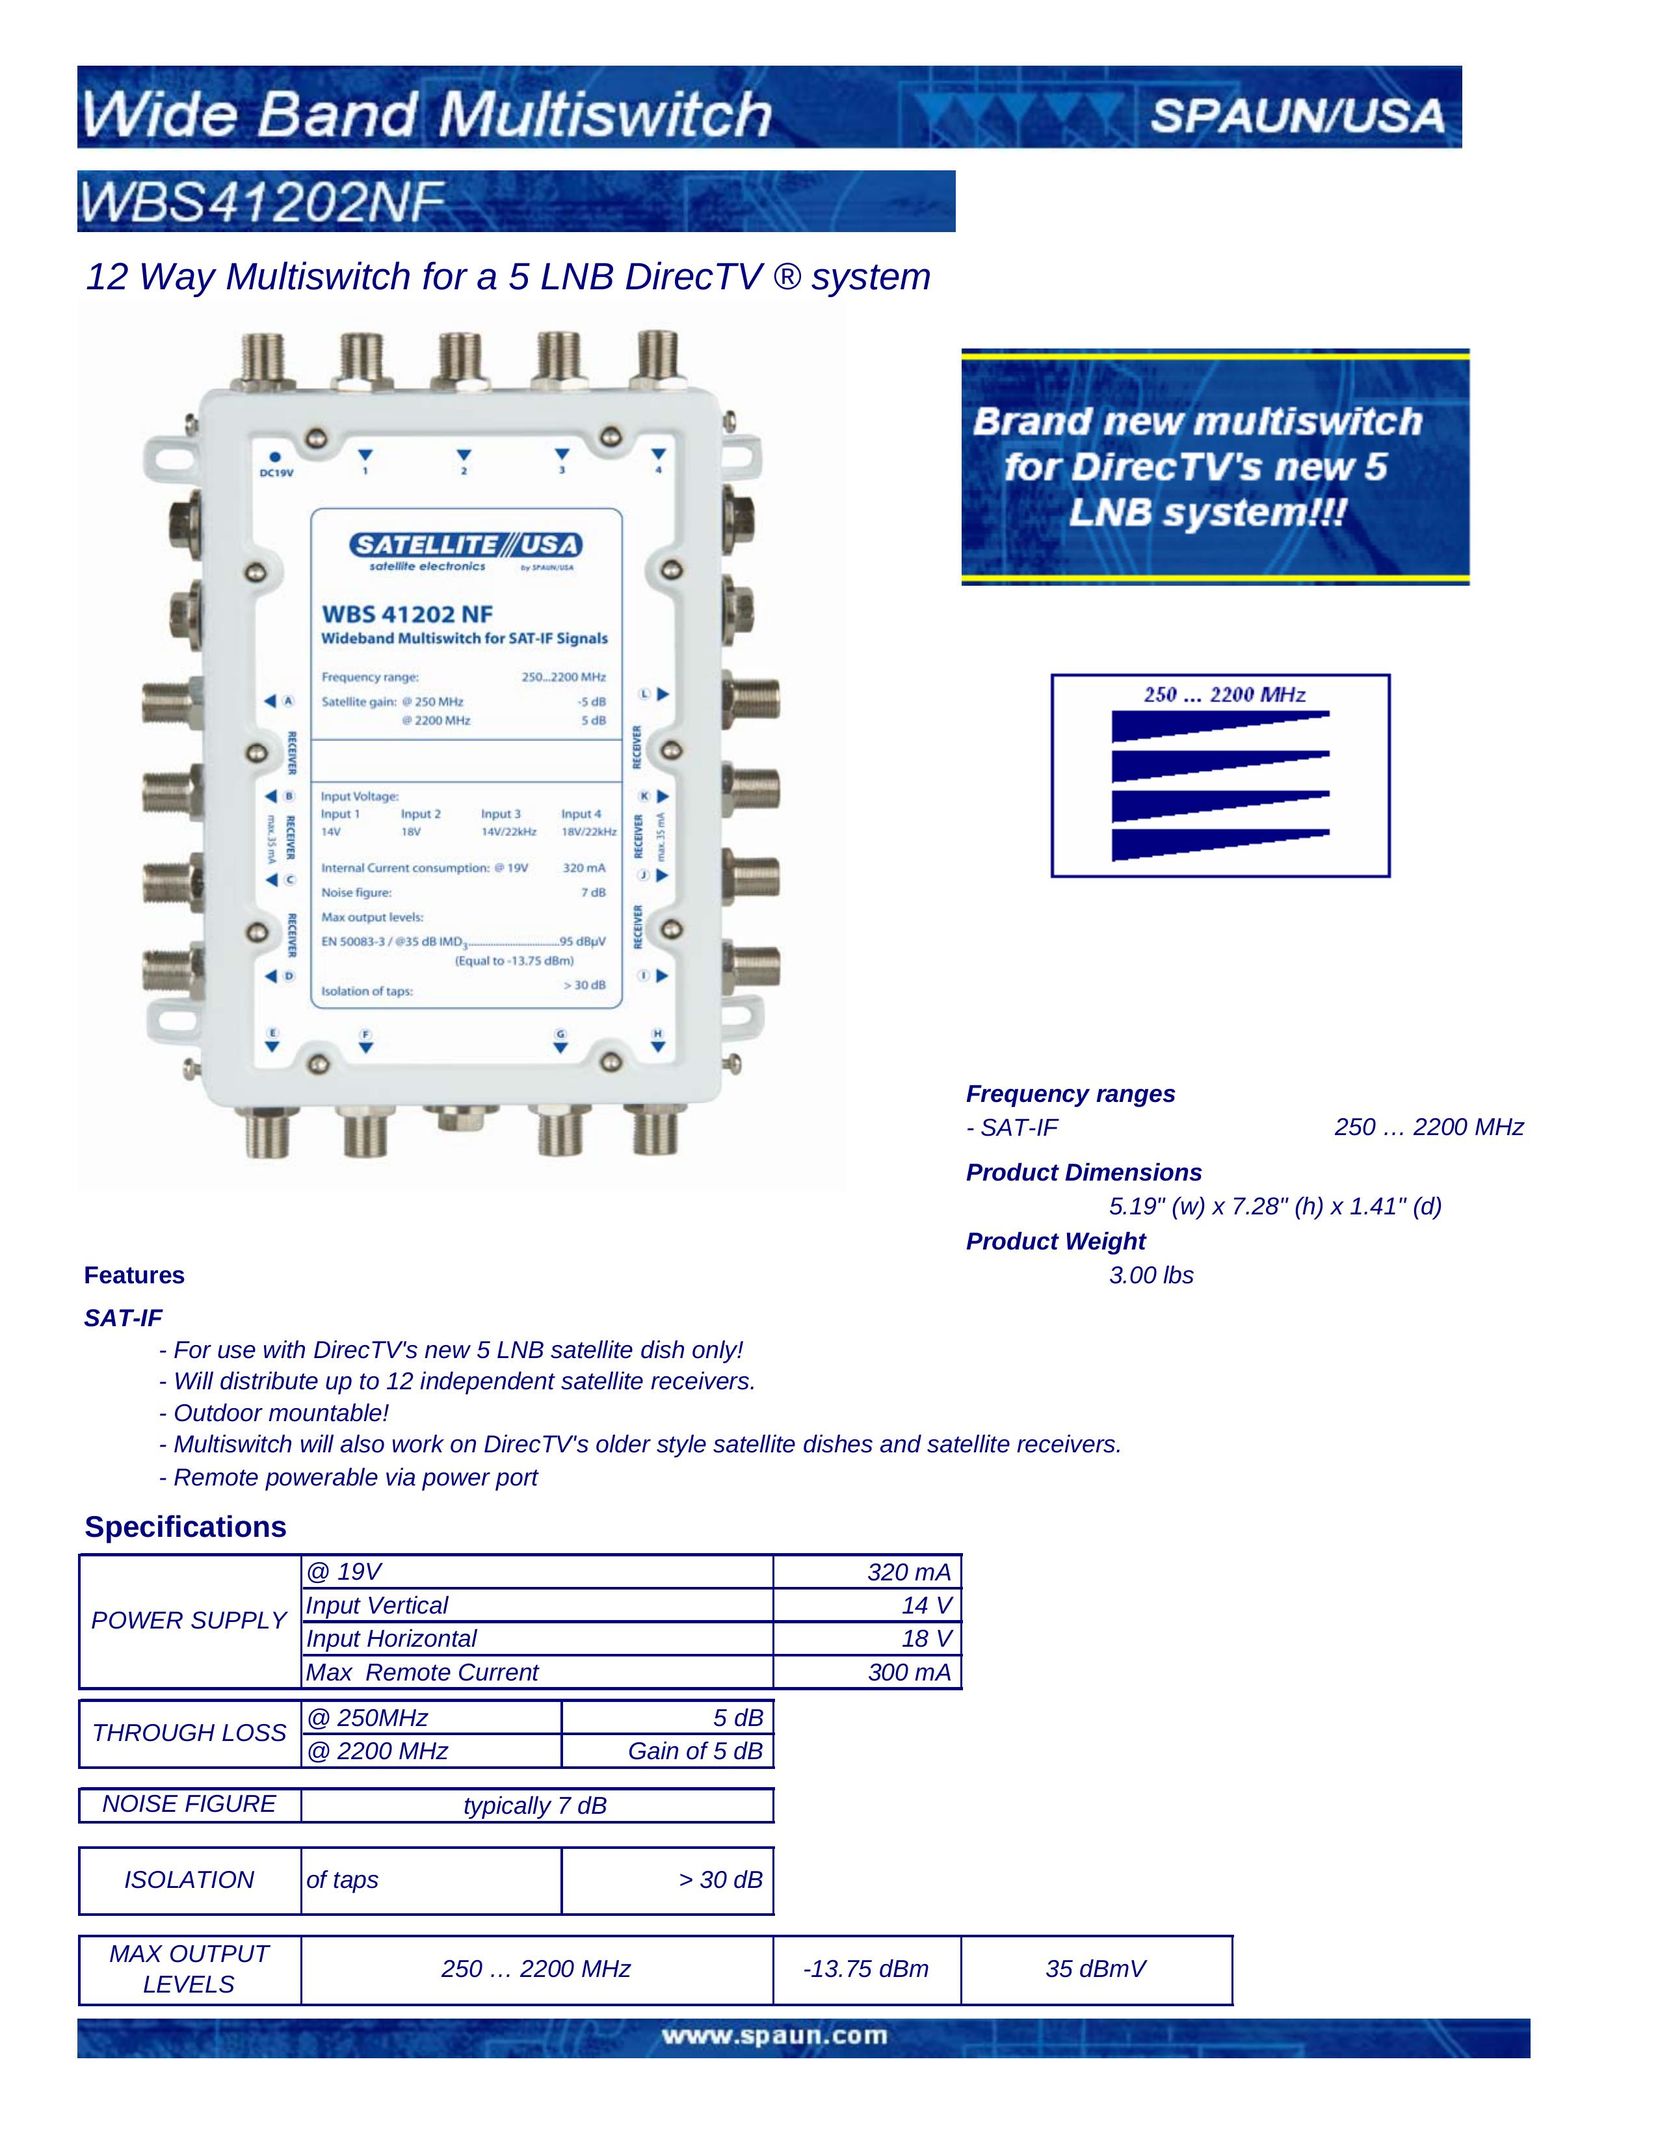 HomeTech WBS41202NF Switch User Manual